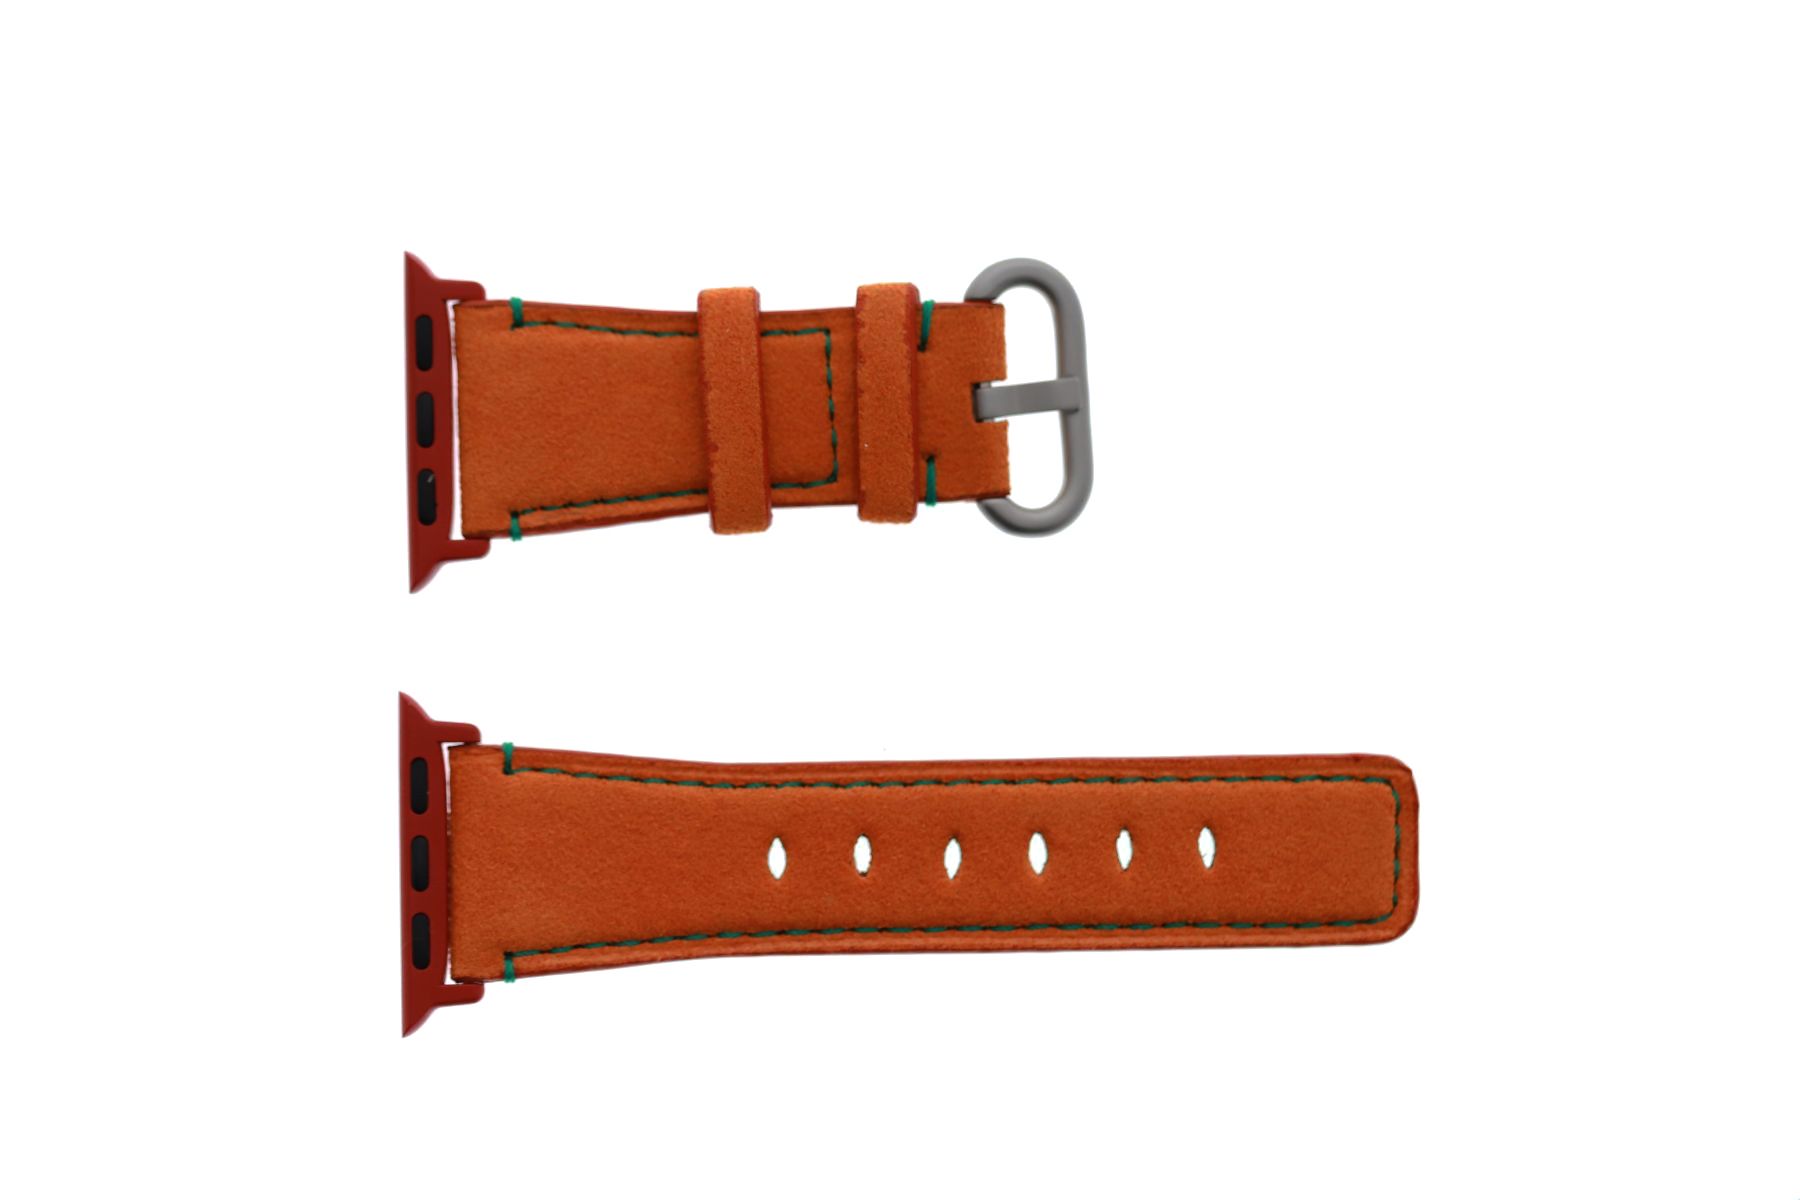 Band for Tiny Wrist (for All Apple Watch sizes) in ORANGE Alcantara. Kids Collection